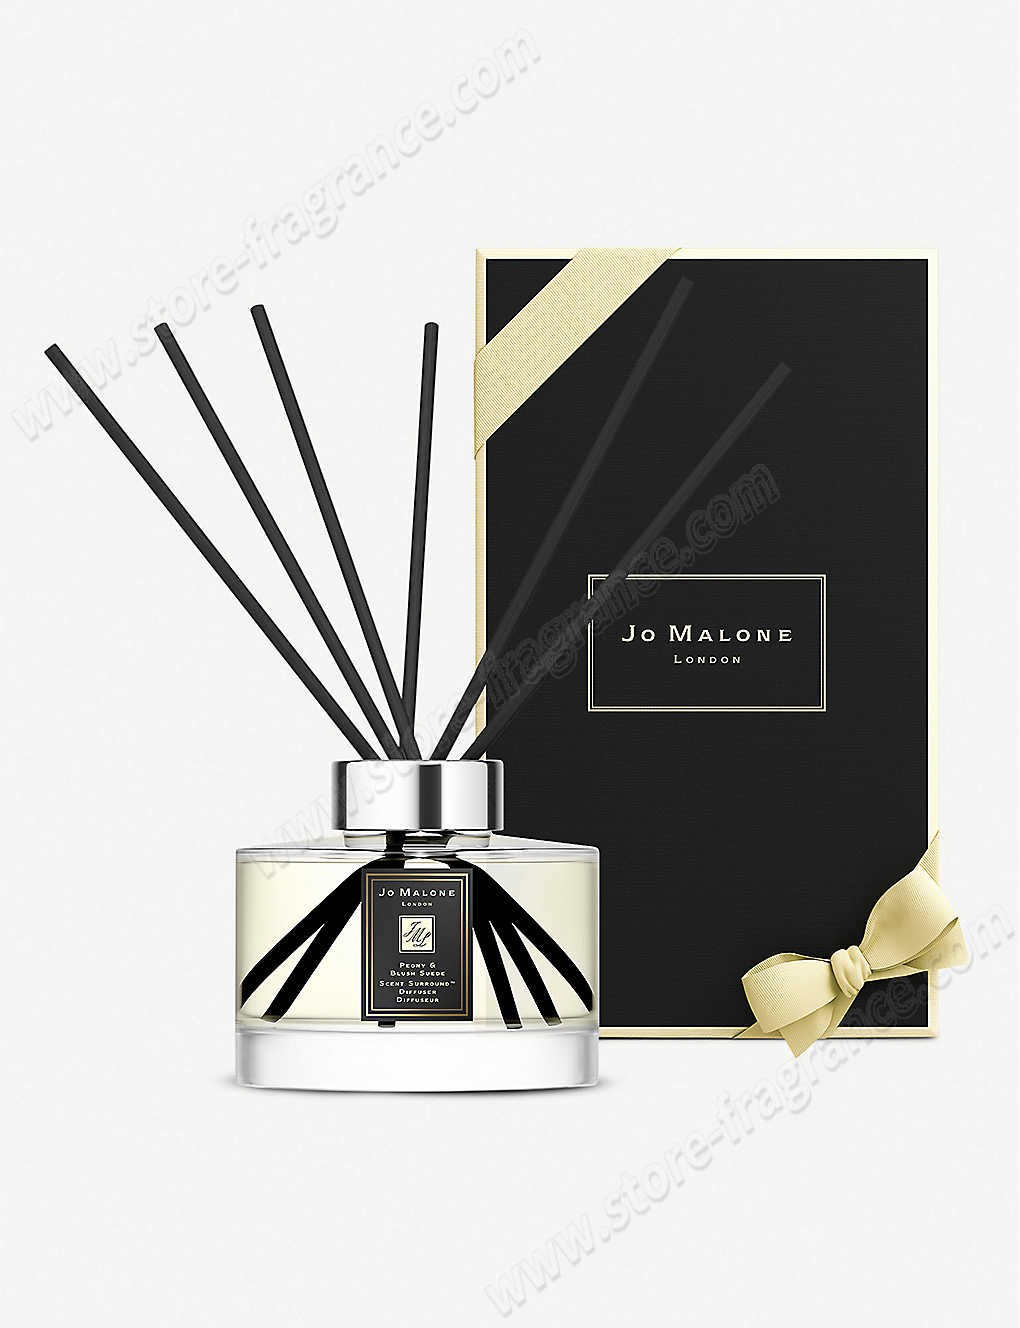 JO MALONE LONDON/Peony & Blush Suede Scent Surround™ Diffuser 165ml Limit Offer - -1